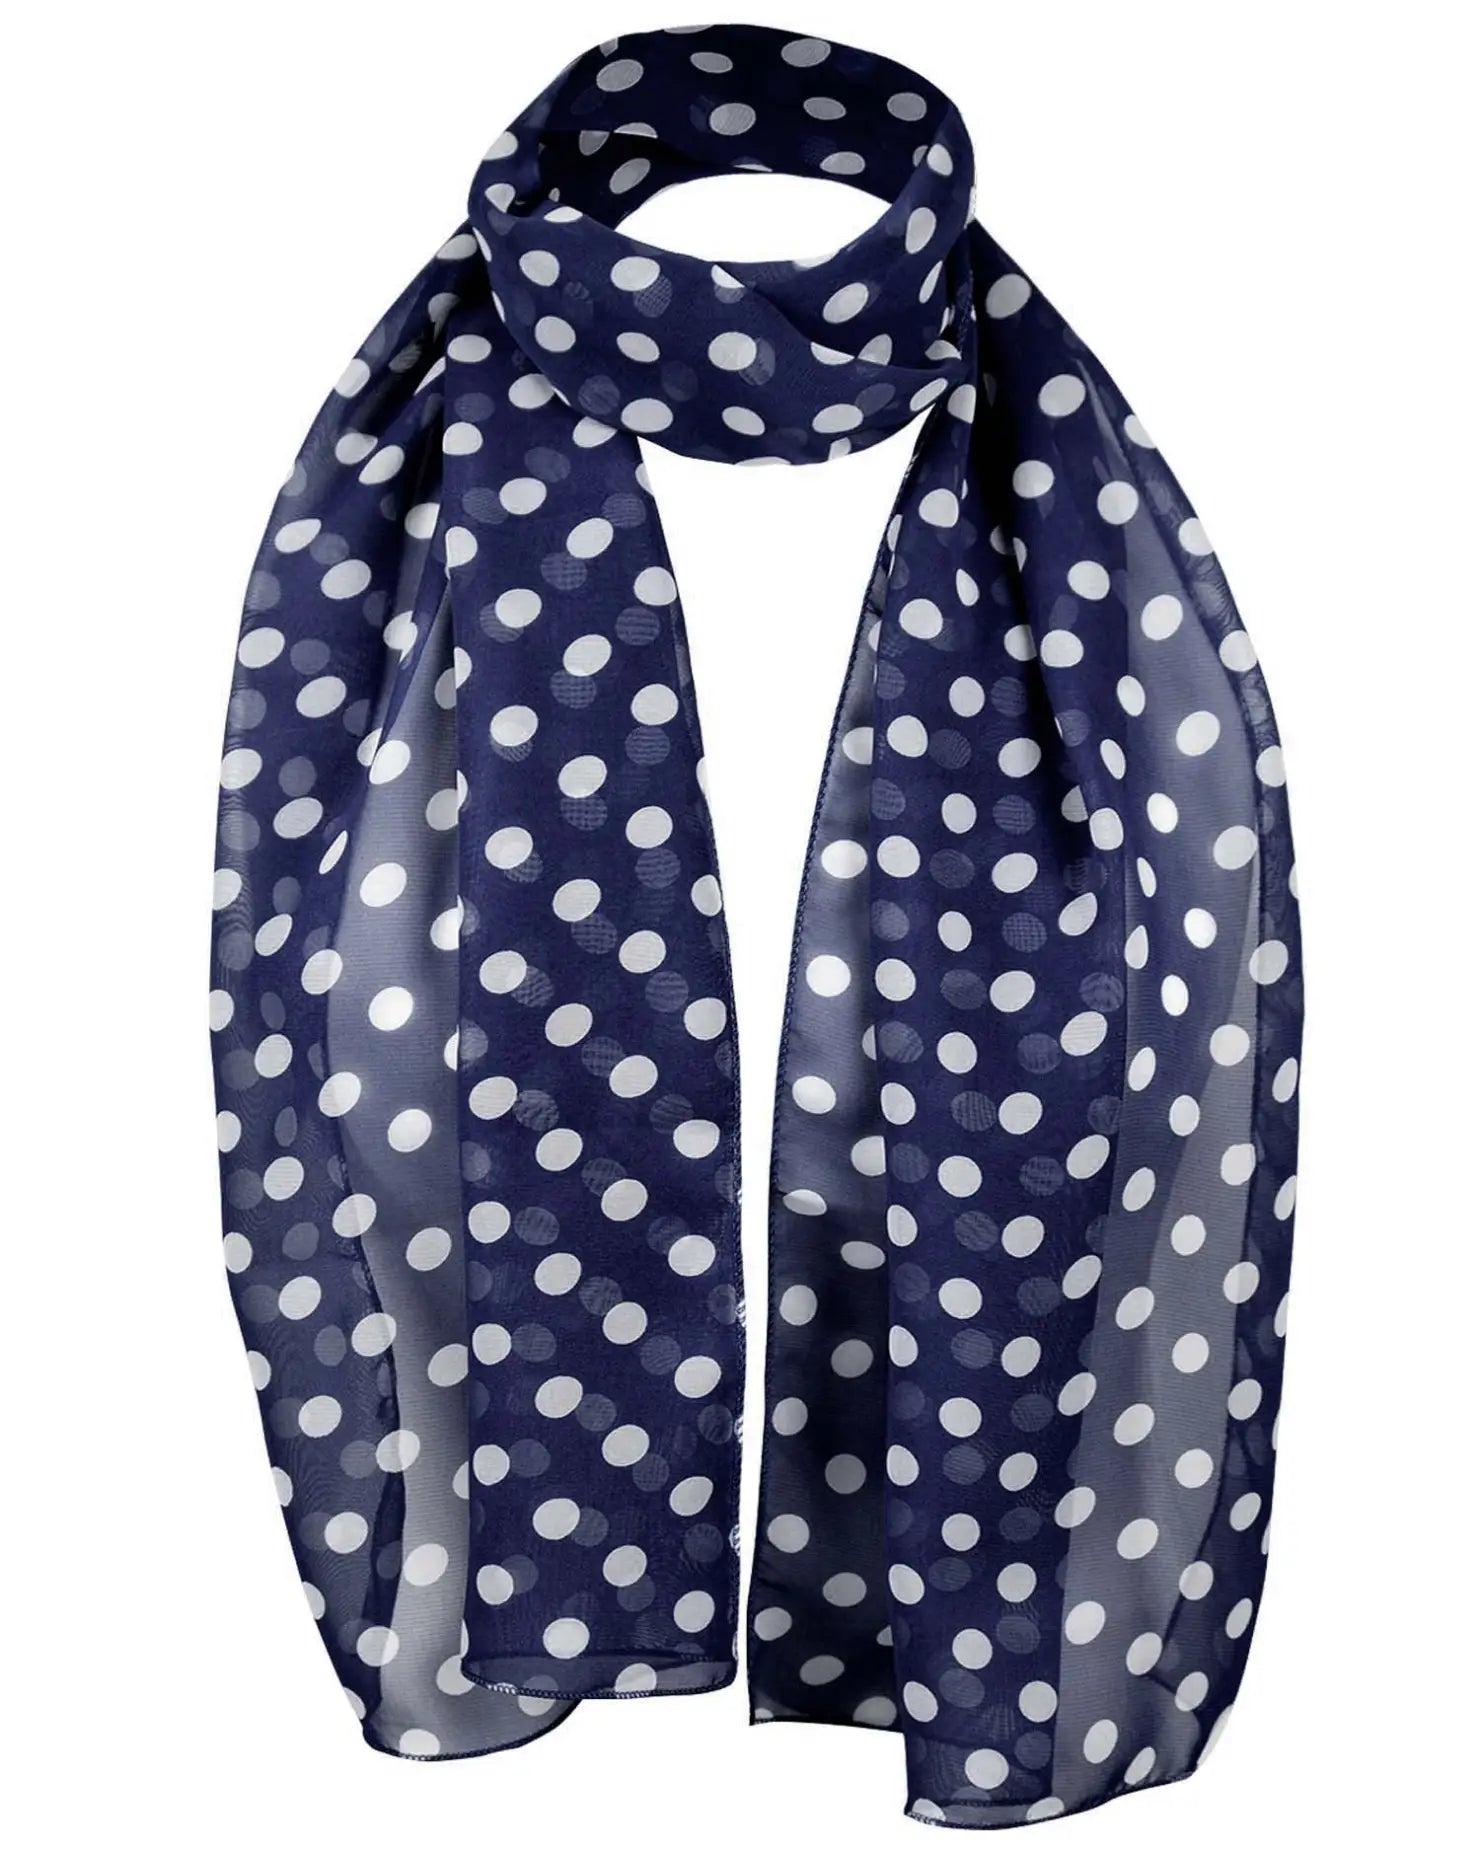 Polka dot chiffon scarf in navy and white pattern, reminiscent of classic 50s & 60s style